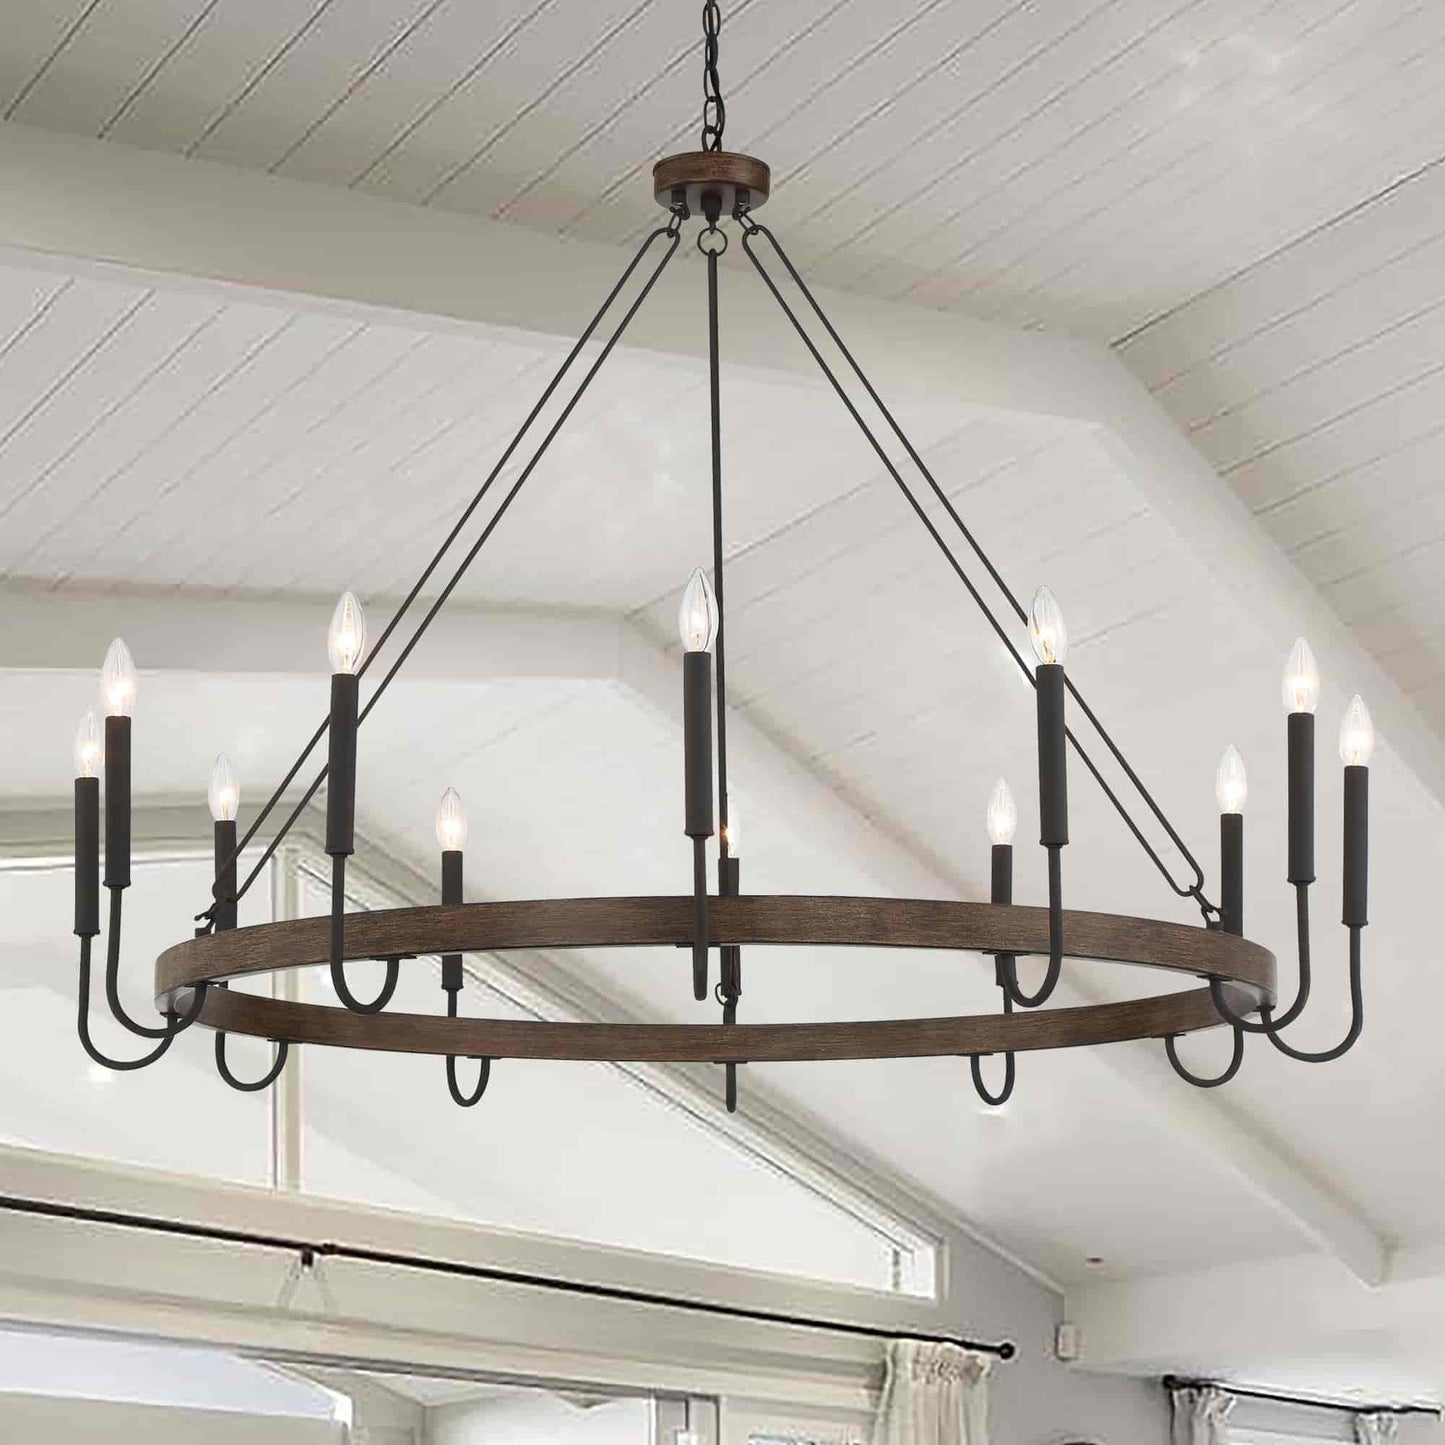 12 light candle style wagon wheel chain chandelier (21) by ACROMA